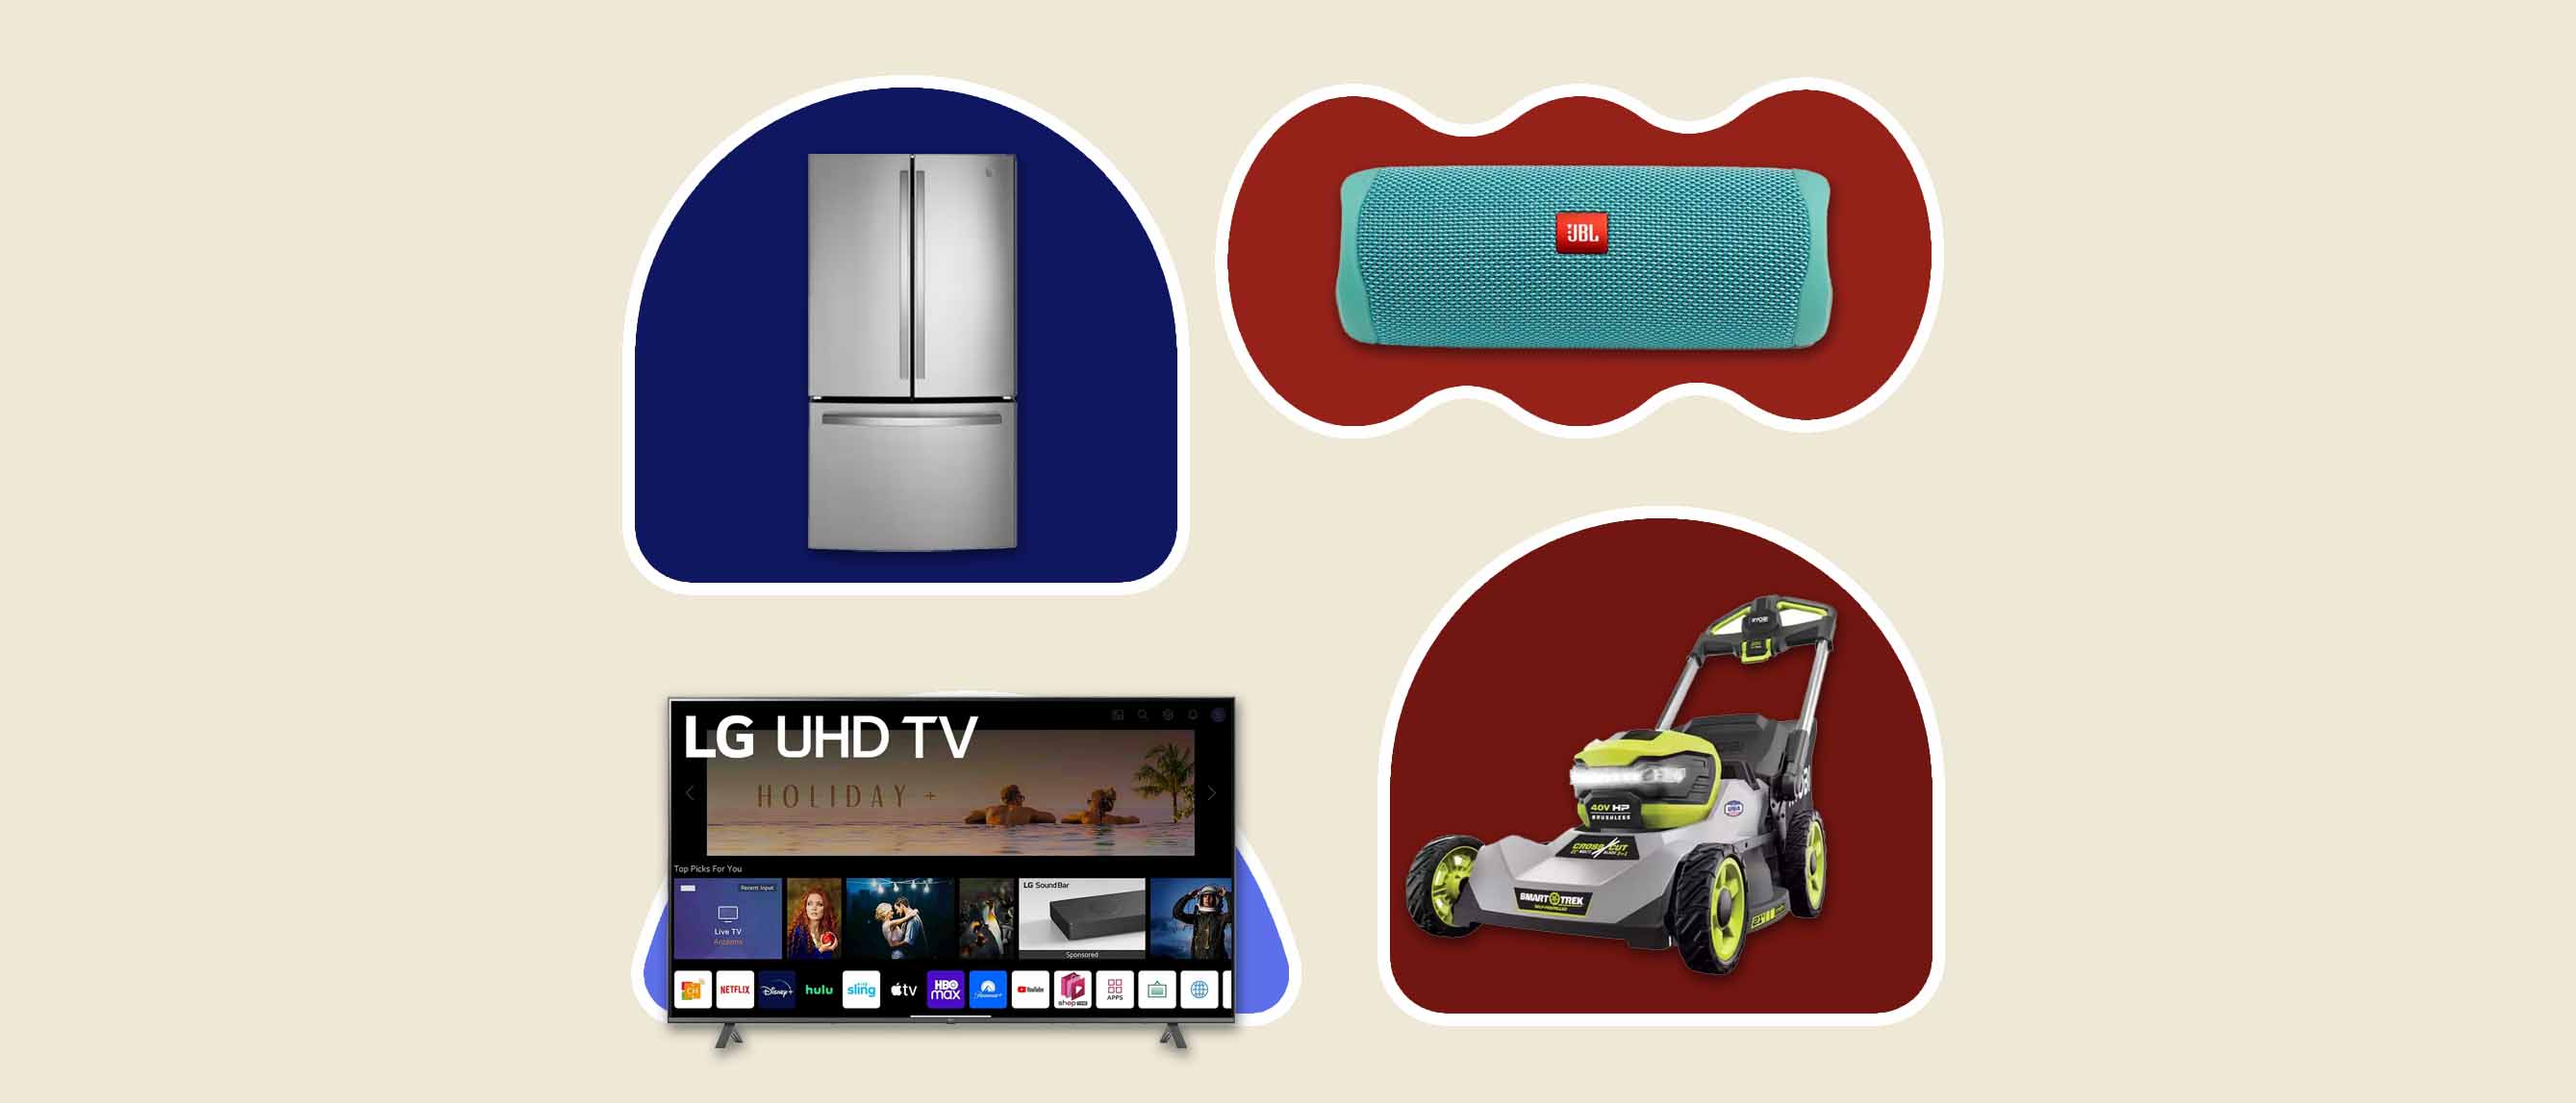 a roundup of the best fourth of July sales including a G.E refrigerator, JBL speaker, LG UHD TV, cordless lawn mower